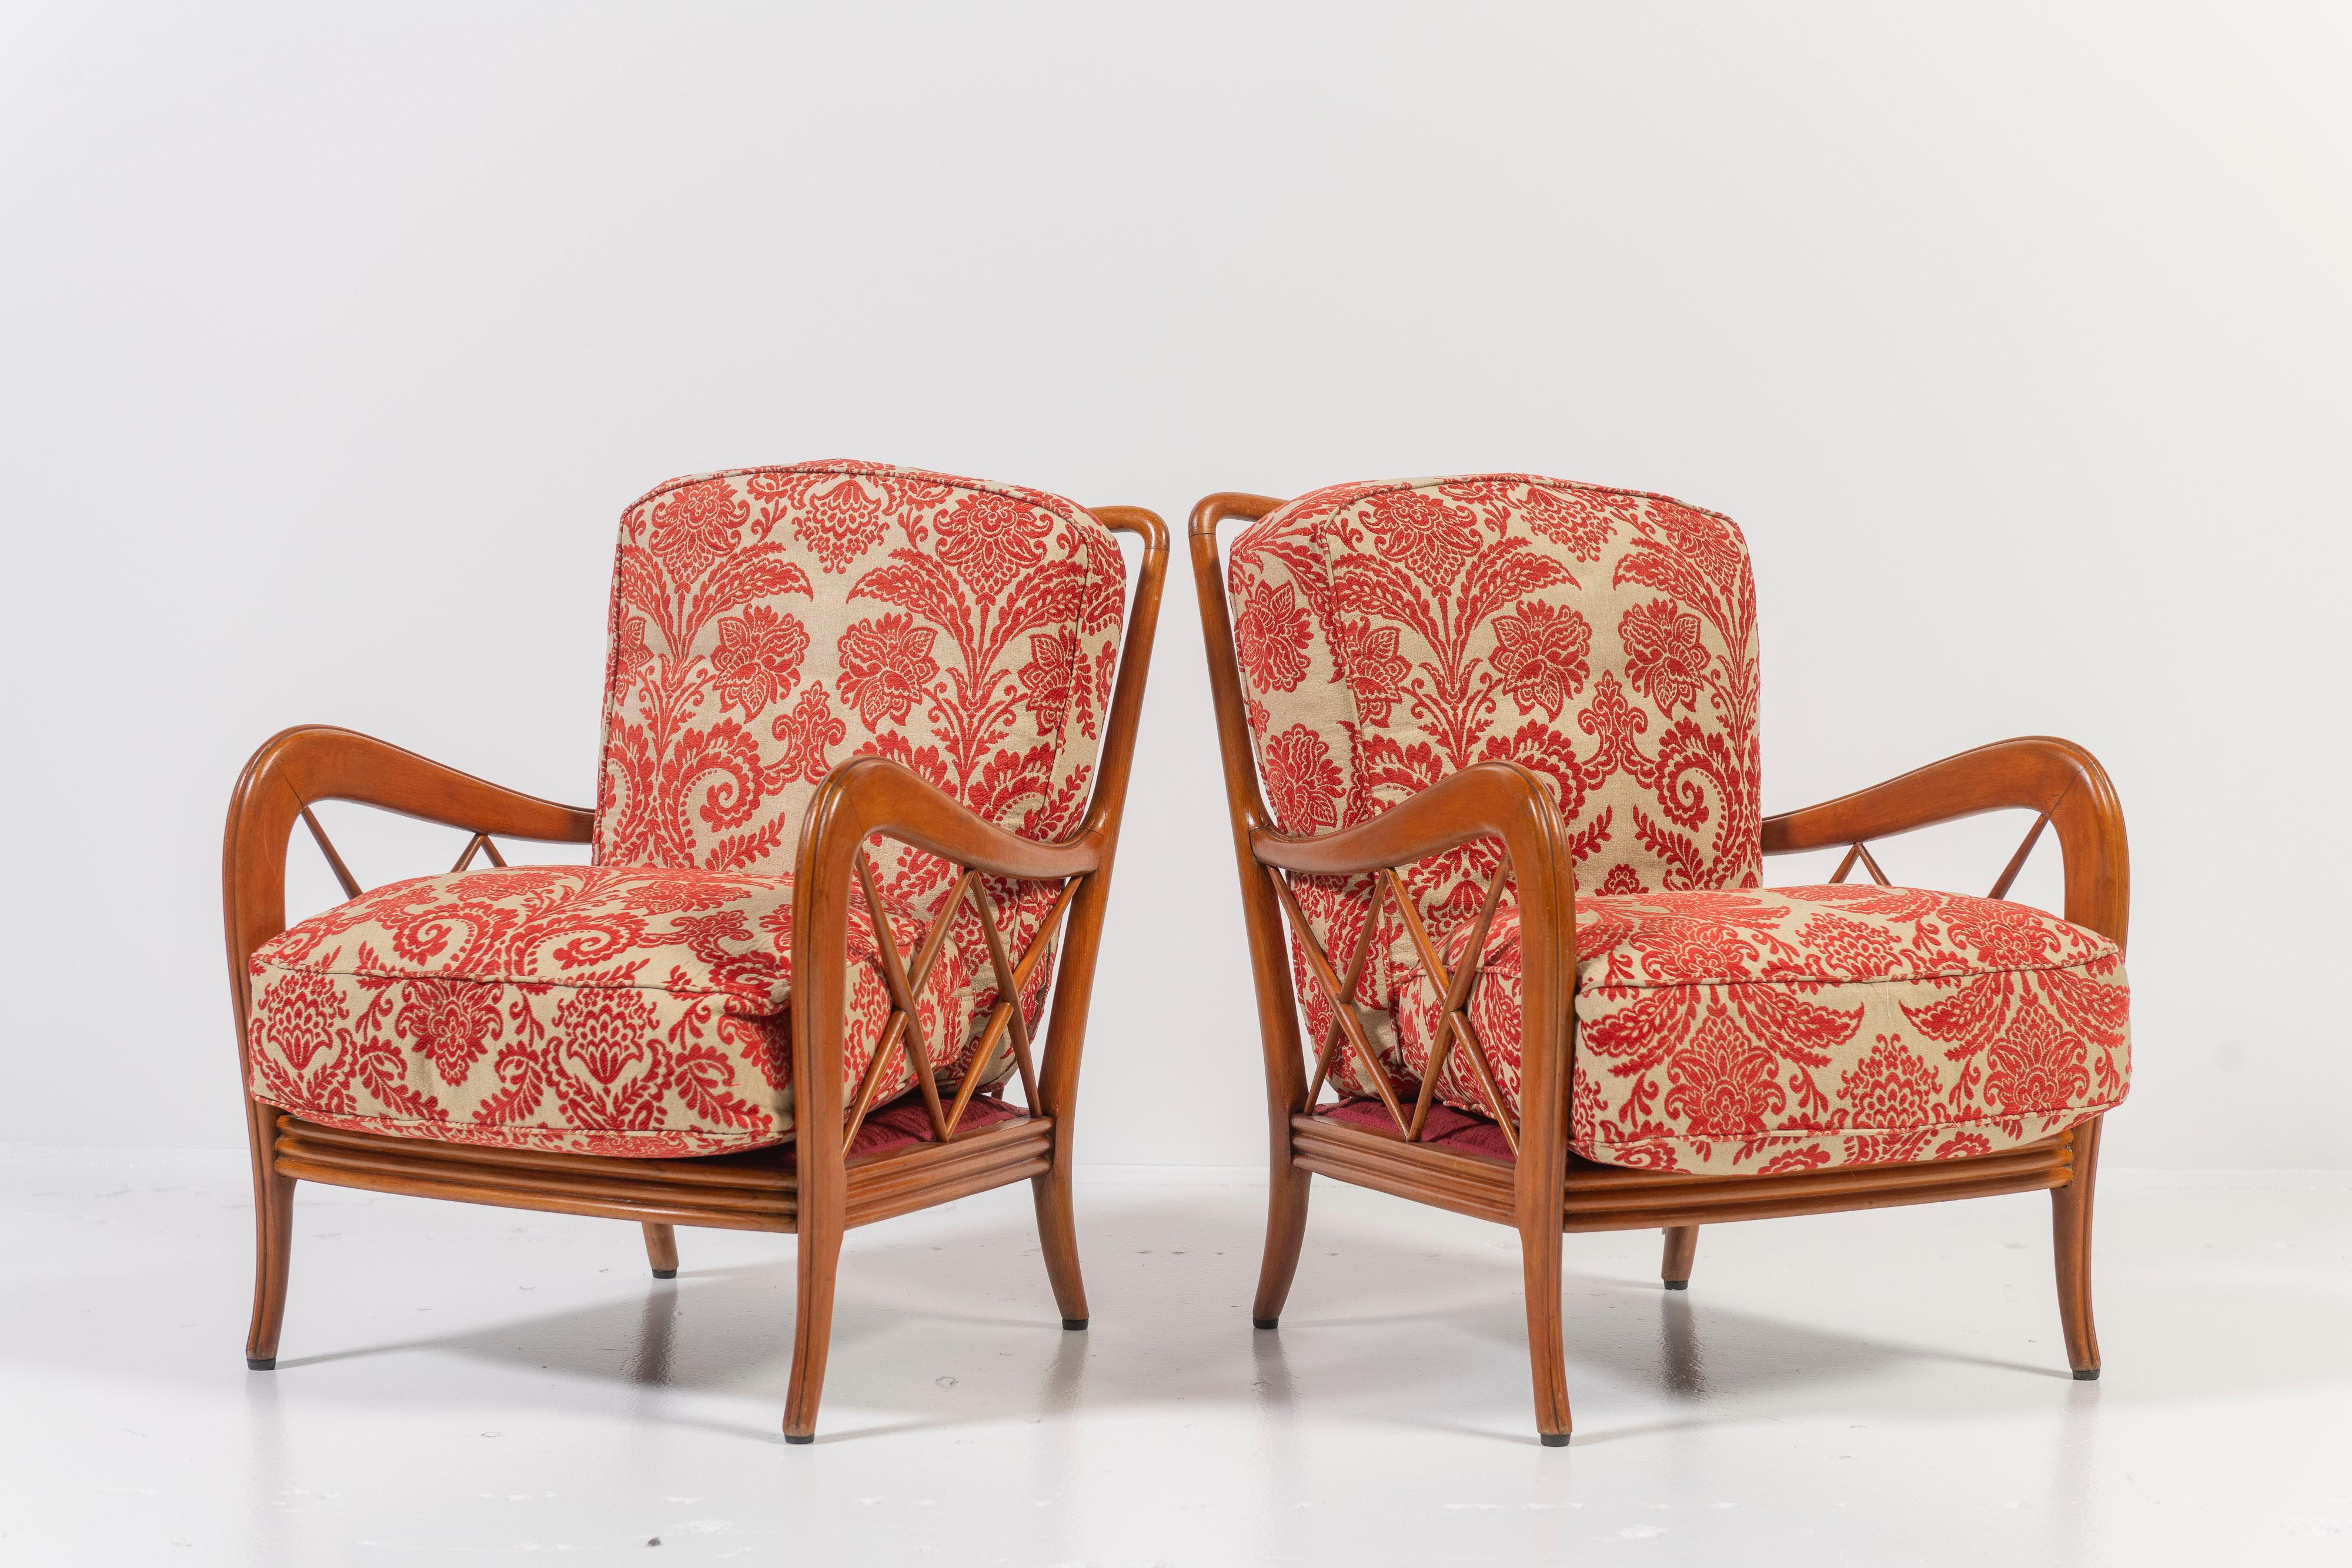 This classic pair of Paulo Buffa lounge chairs are elegant, comfortable and beautifully made in cherry wood.  The ergonomic design and craftsmanship create the ideal seating experience. The backrest is comprised of six intricately crafted spindles,